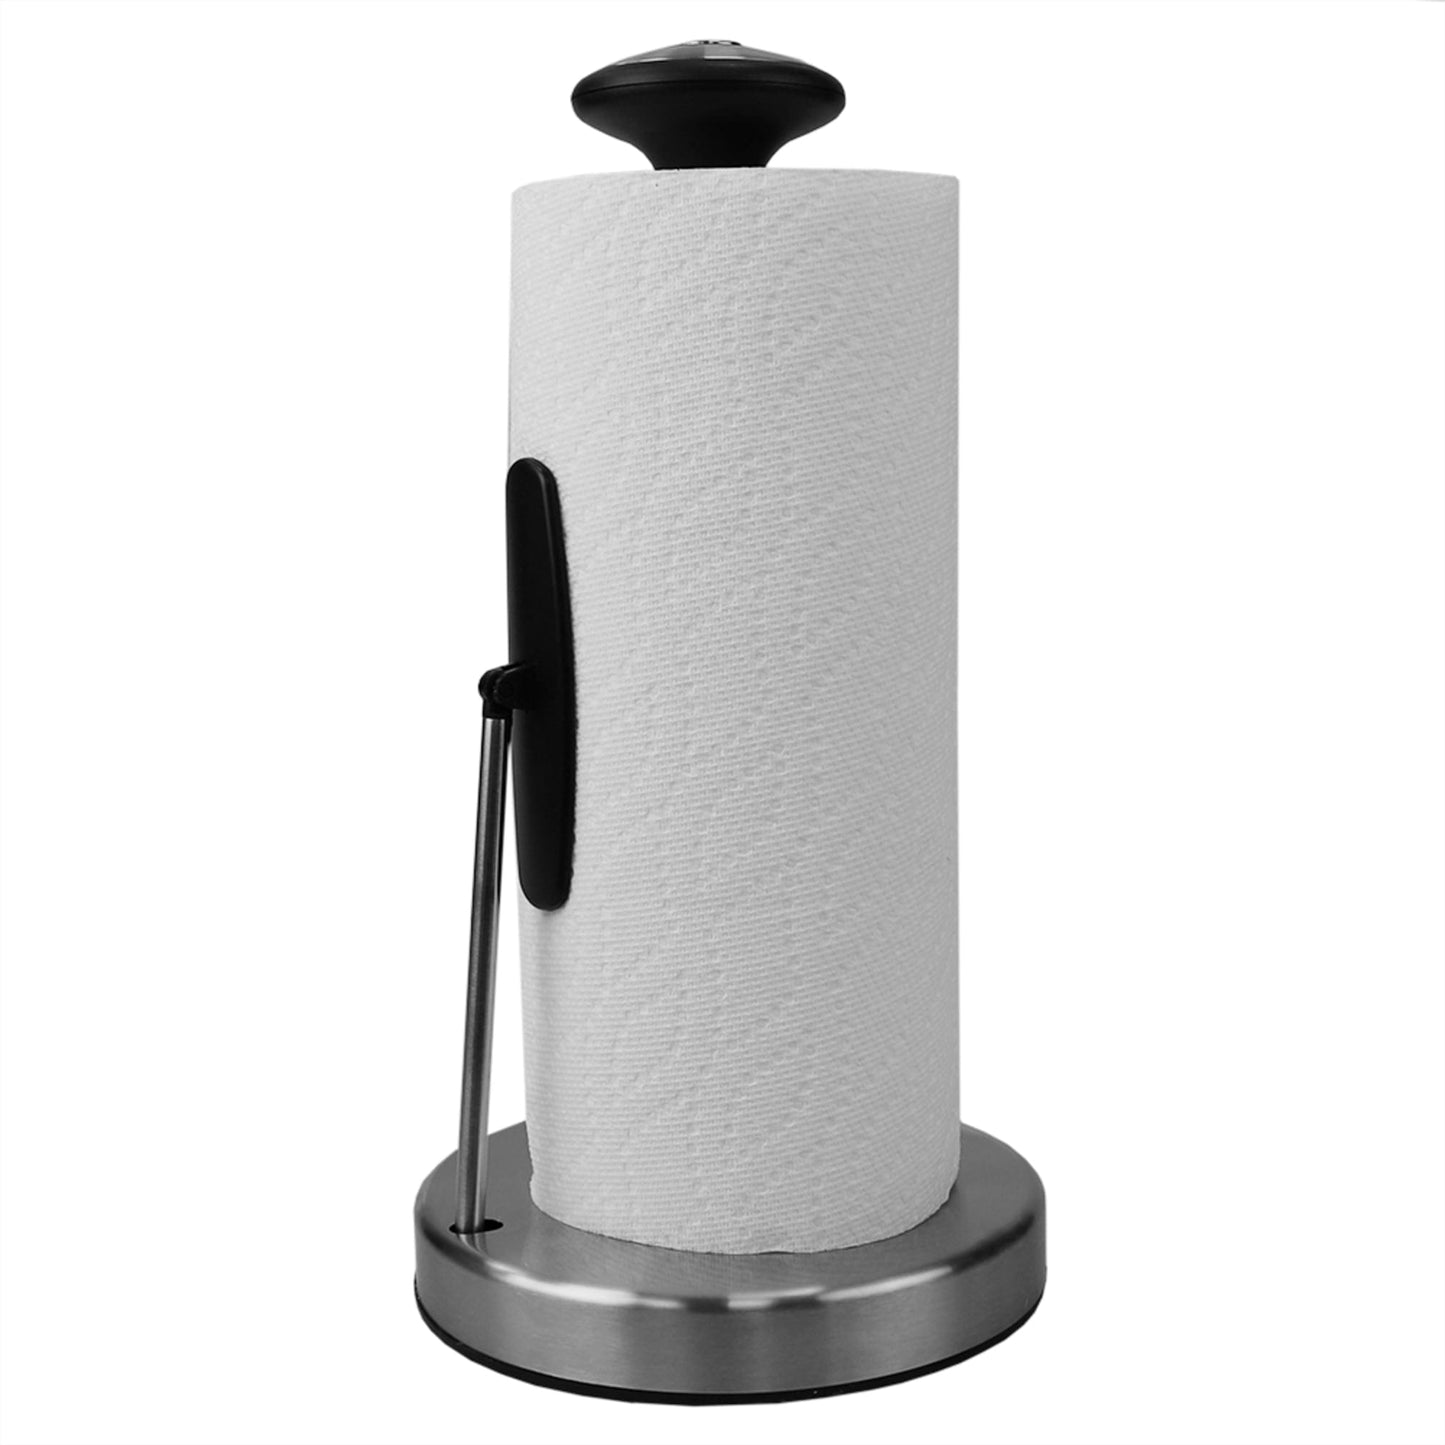 Michael Graves Easy Tear Tension Arm Freestanding Stainless Steel Paper Towel Holder, Silver